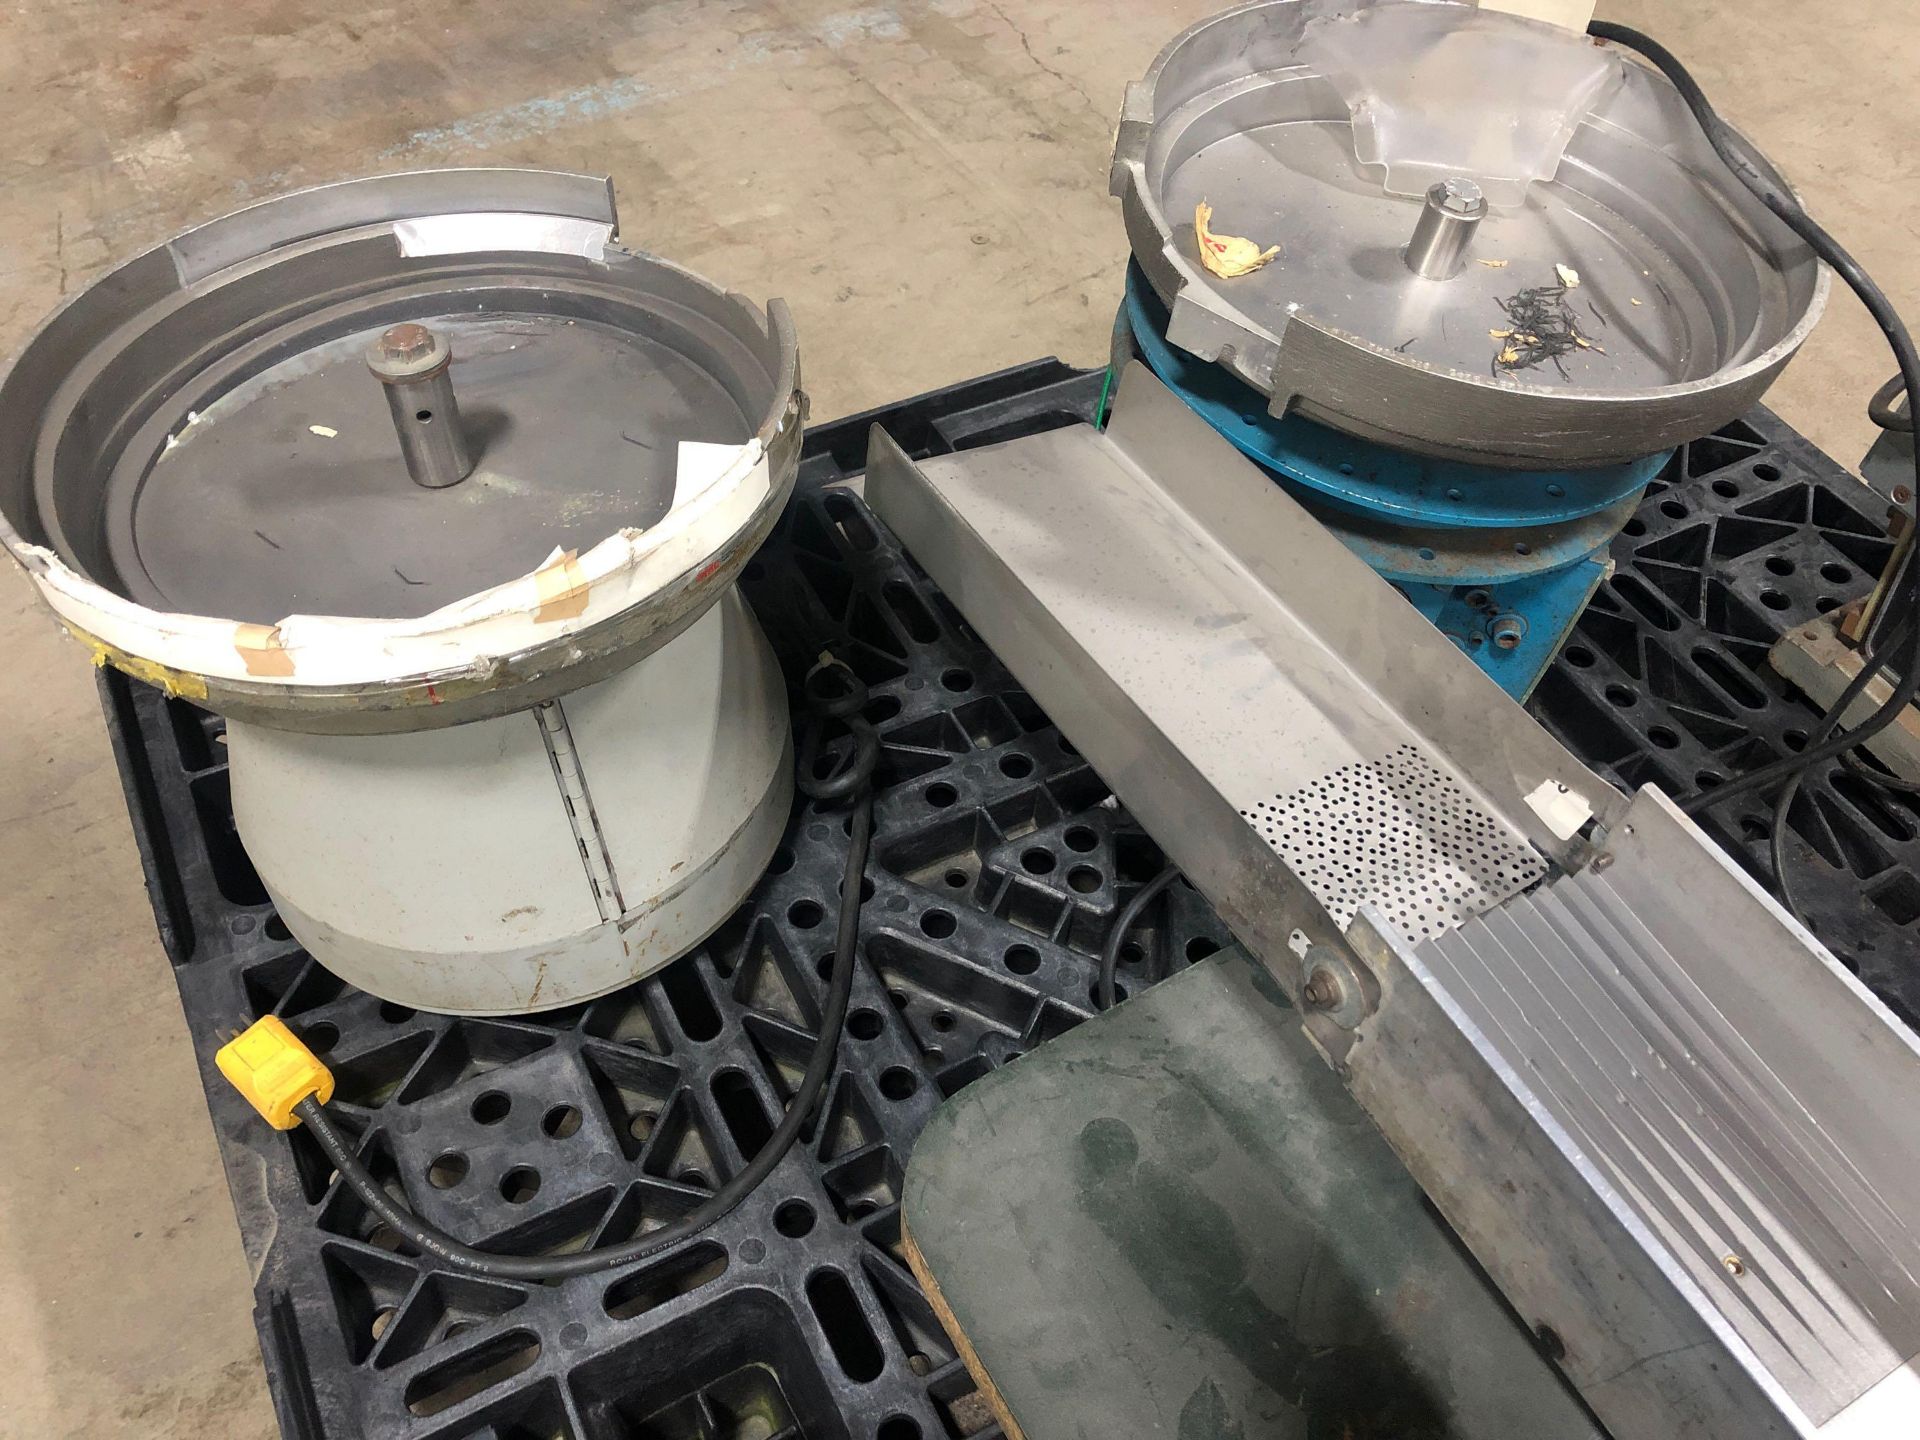 Qty 5 - assorted vibratory feeders from Syntron and Automation devices. - Image 6 of 6